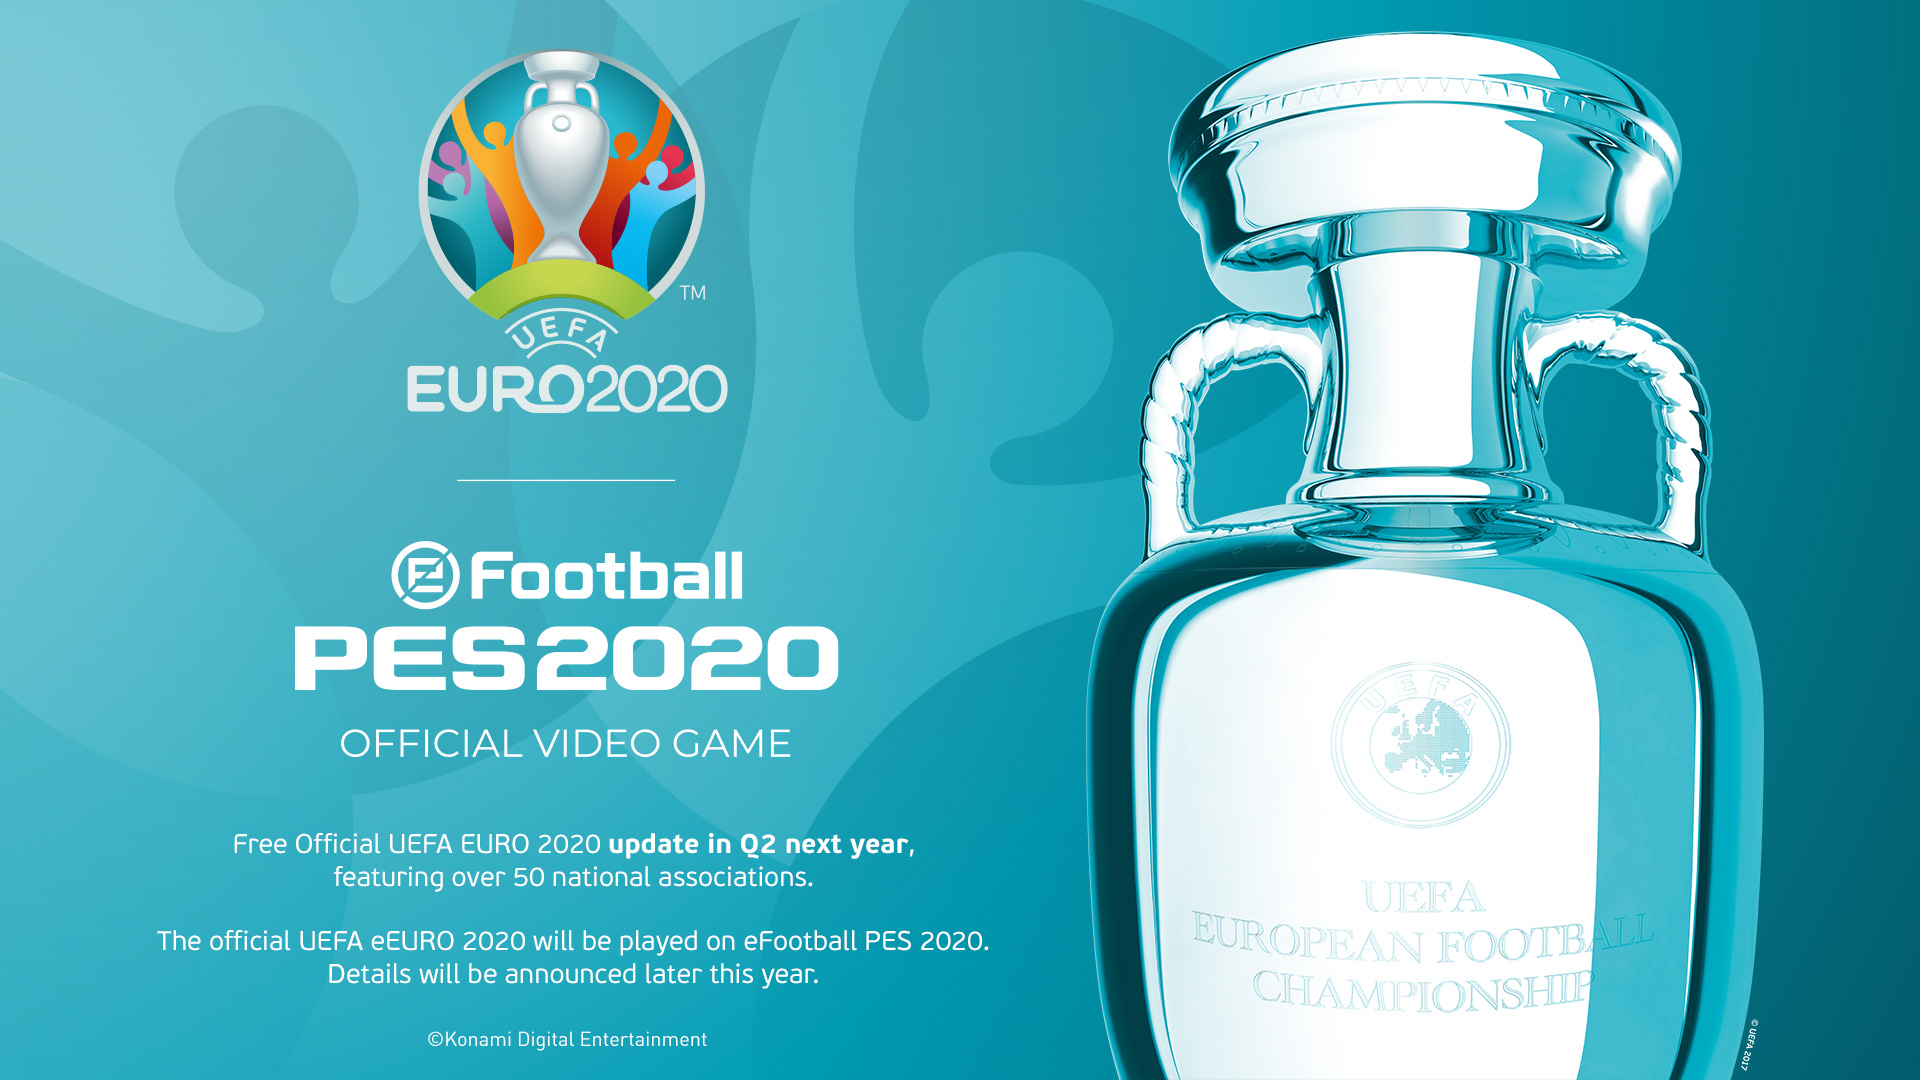 Konami Partners With UEFA EURO 2020, Adds Another Exclusive Team License And eSports Competition To eFootball PES 2020